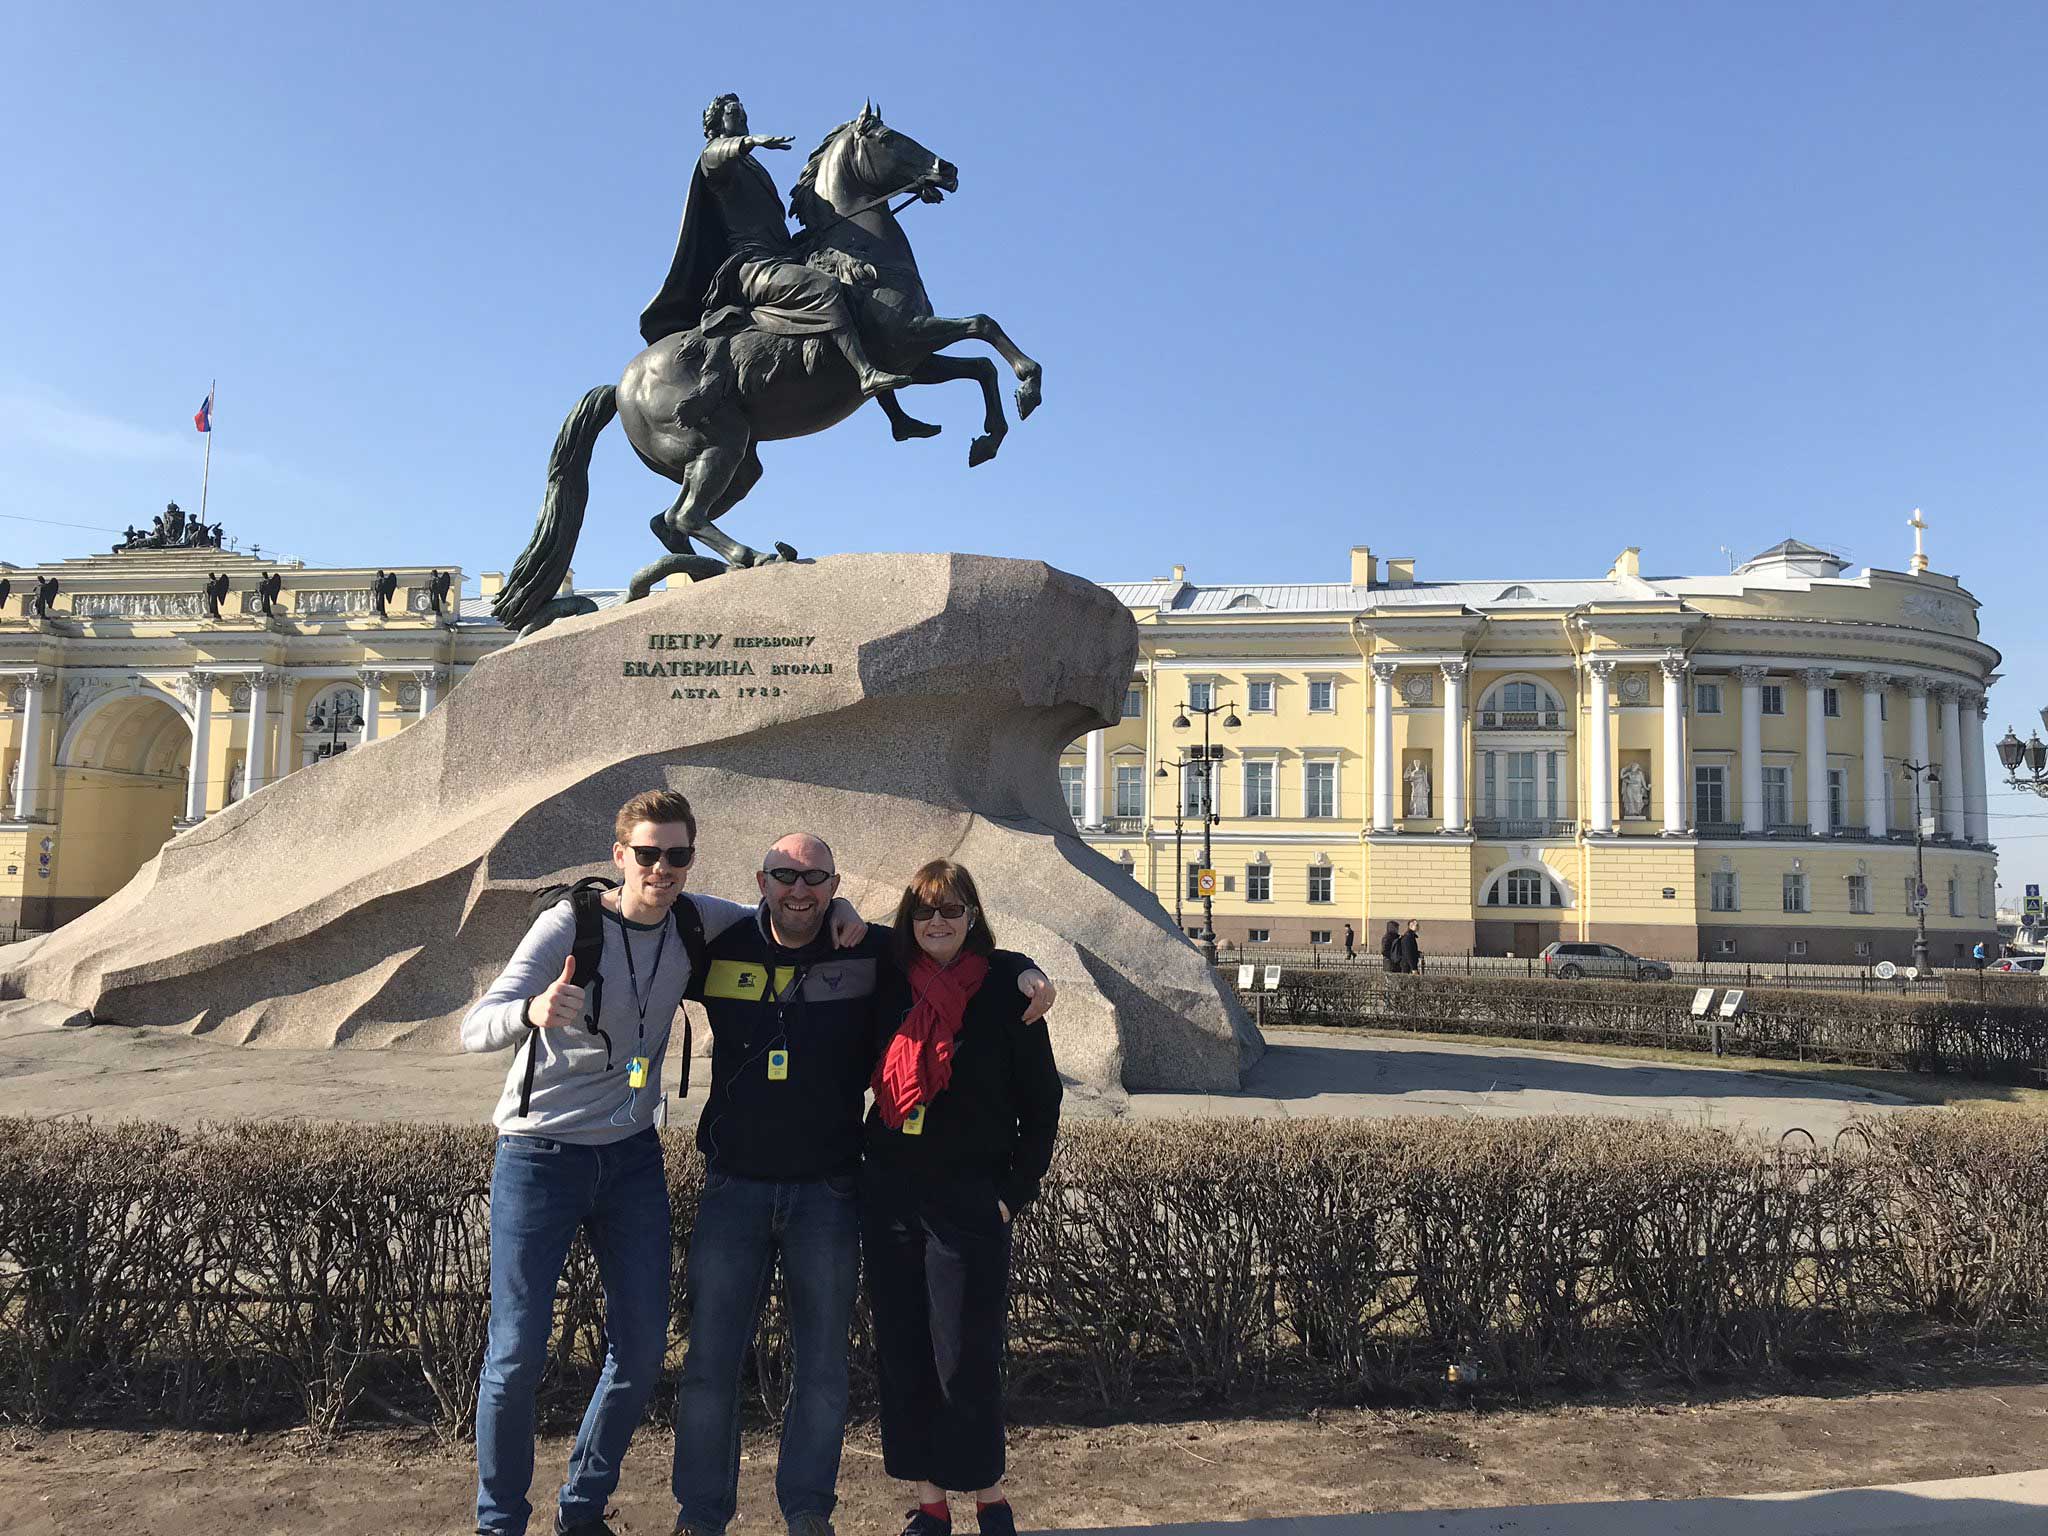 St Petersburg Russia tours: Staff having a great time at the statue of Peter the Great,...